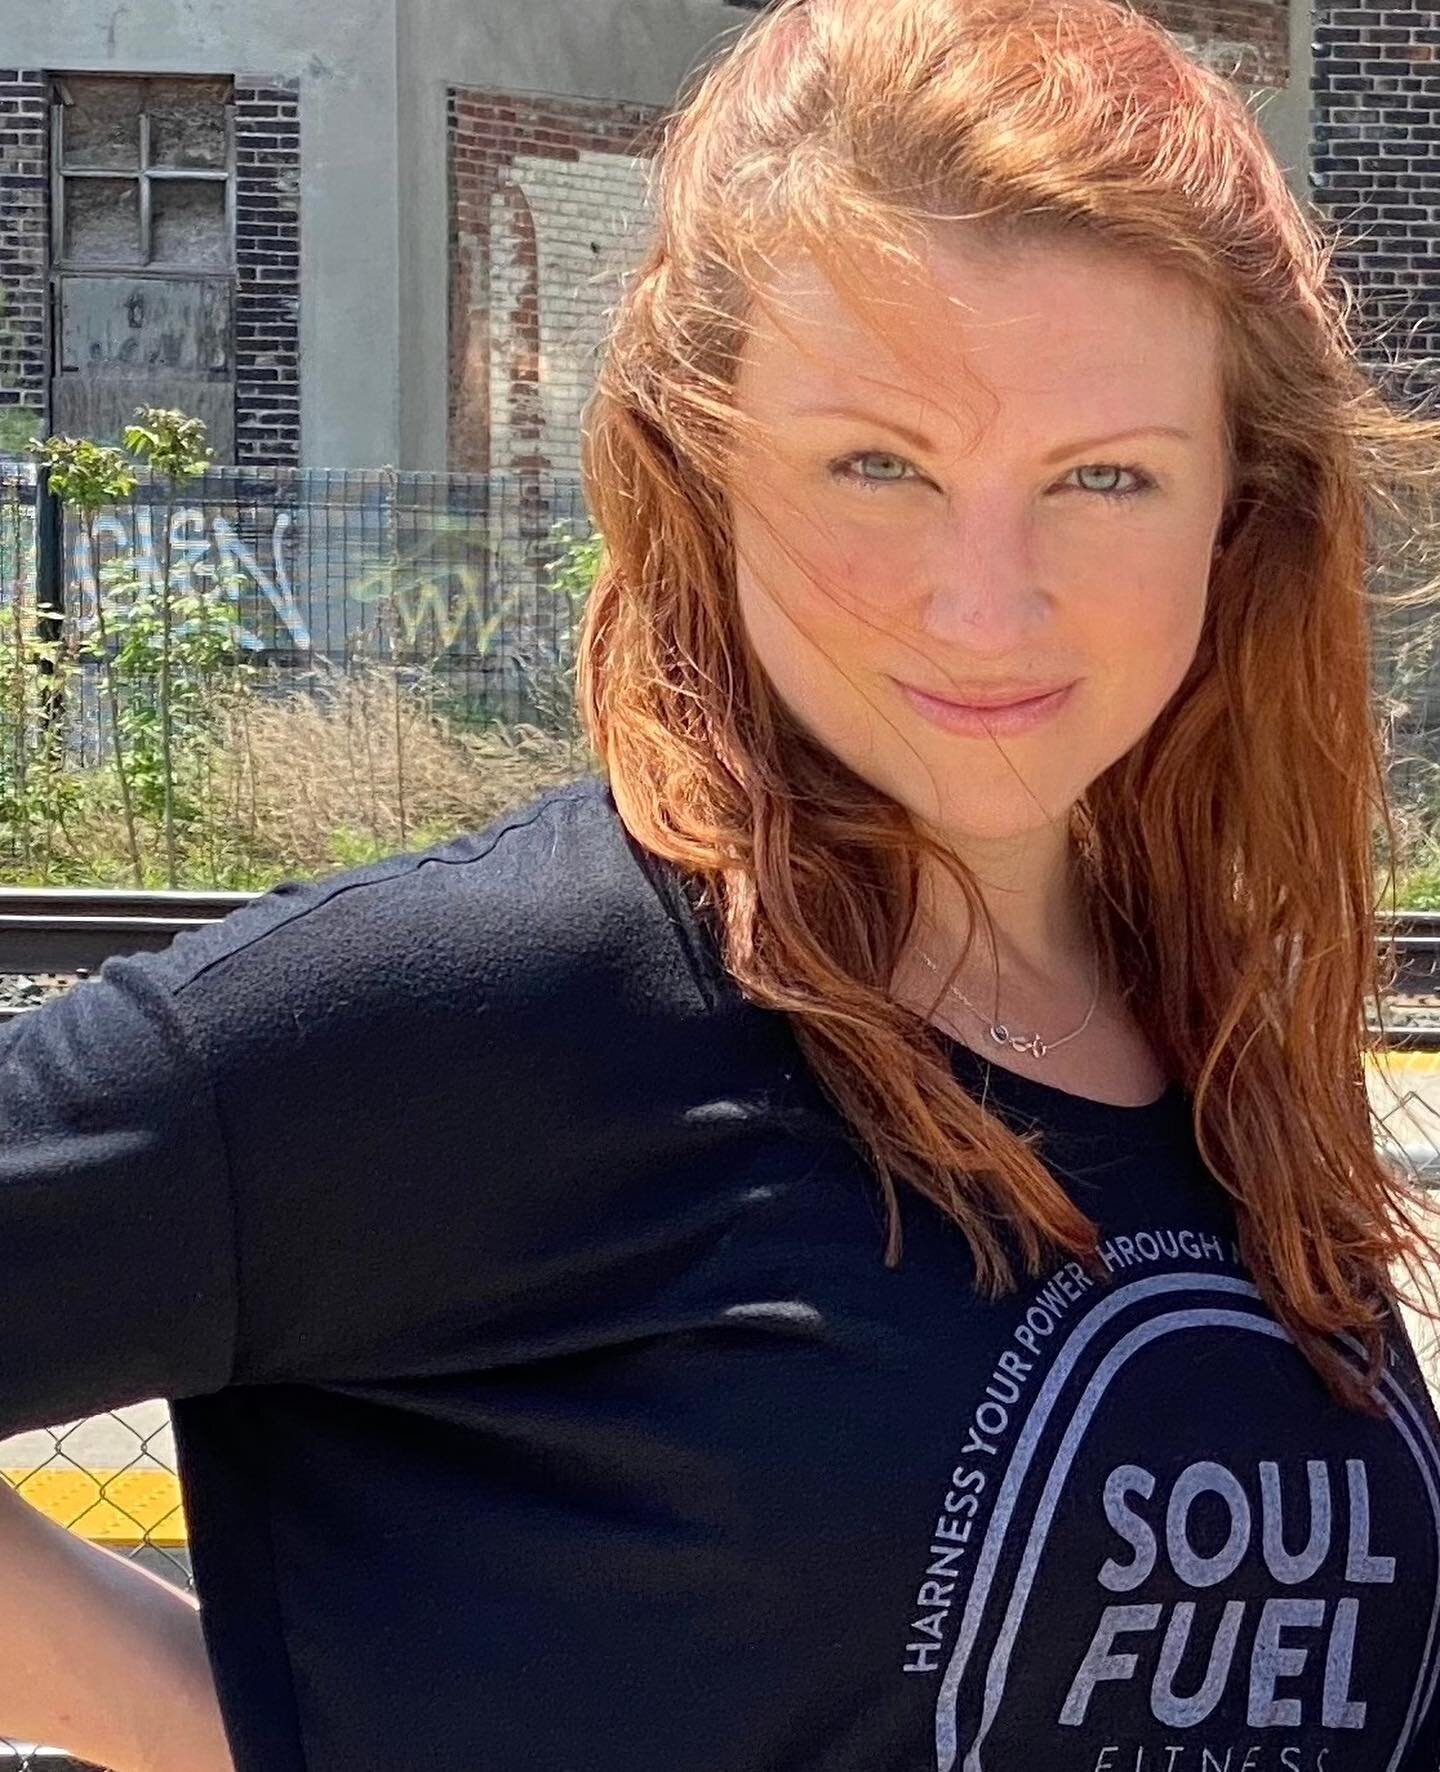 Spring face. Awake and Alive. Oh! And just a TEENY plug on what's happening @soulfuelfitness_to :)

- 35 weekly Classes: weights, yoga, pilates, dance, hiit
- New classes on our beautiful Back Deck urban oasis⁠
- Weekend workshops: drum fit, hip-hop,